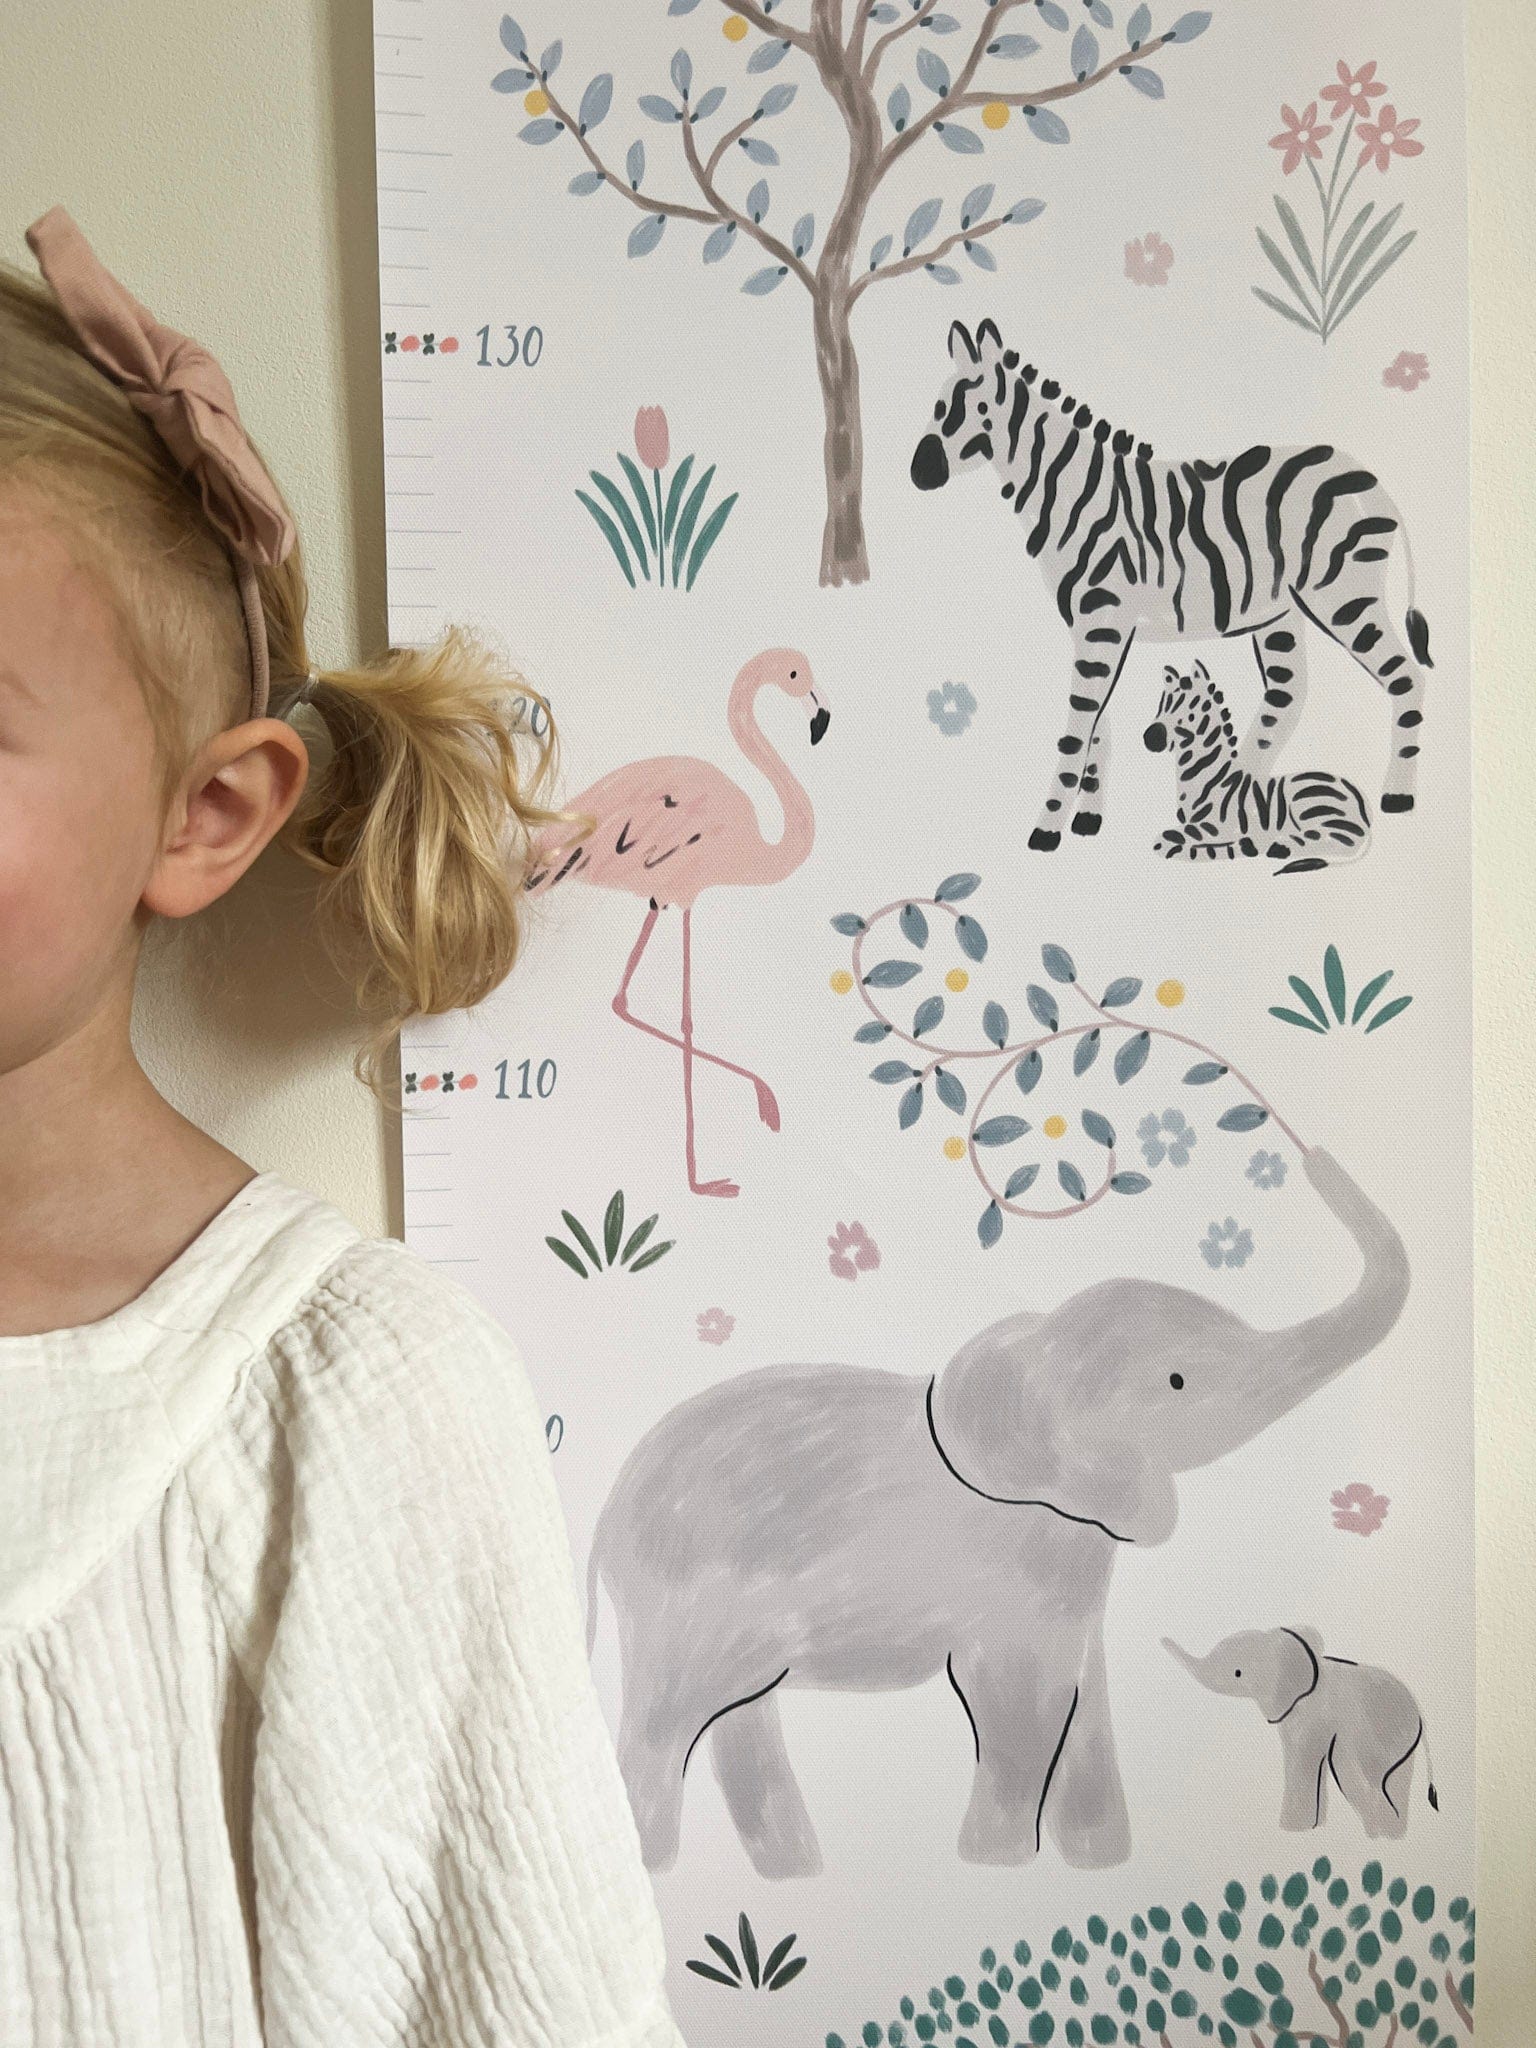 Close up of a girl standing next to the Serengeti height chart. Showing the elephants, flamingo and zebras in detail.